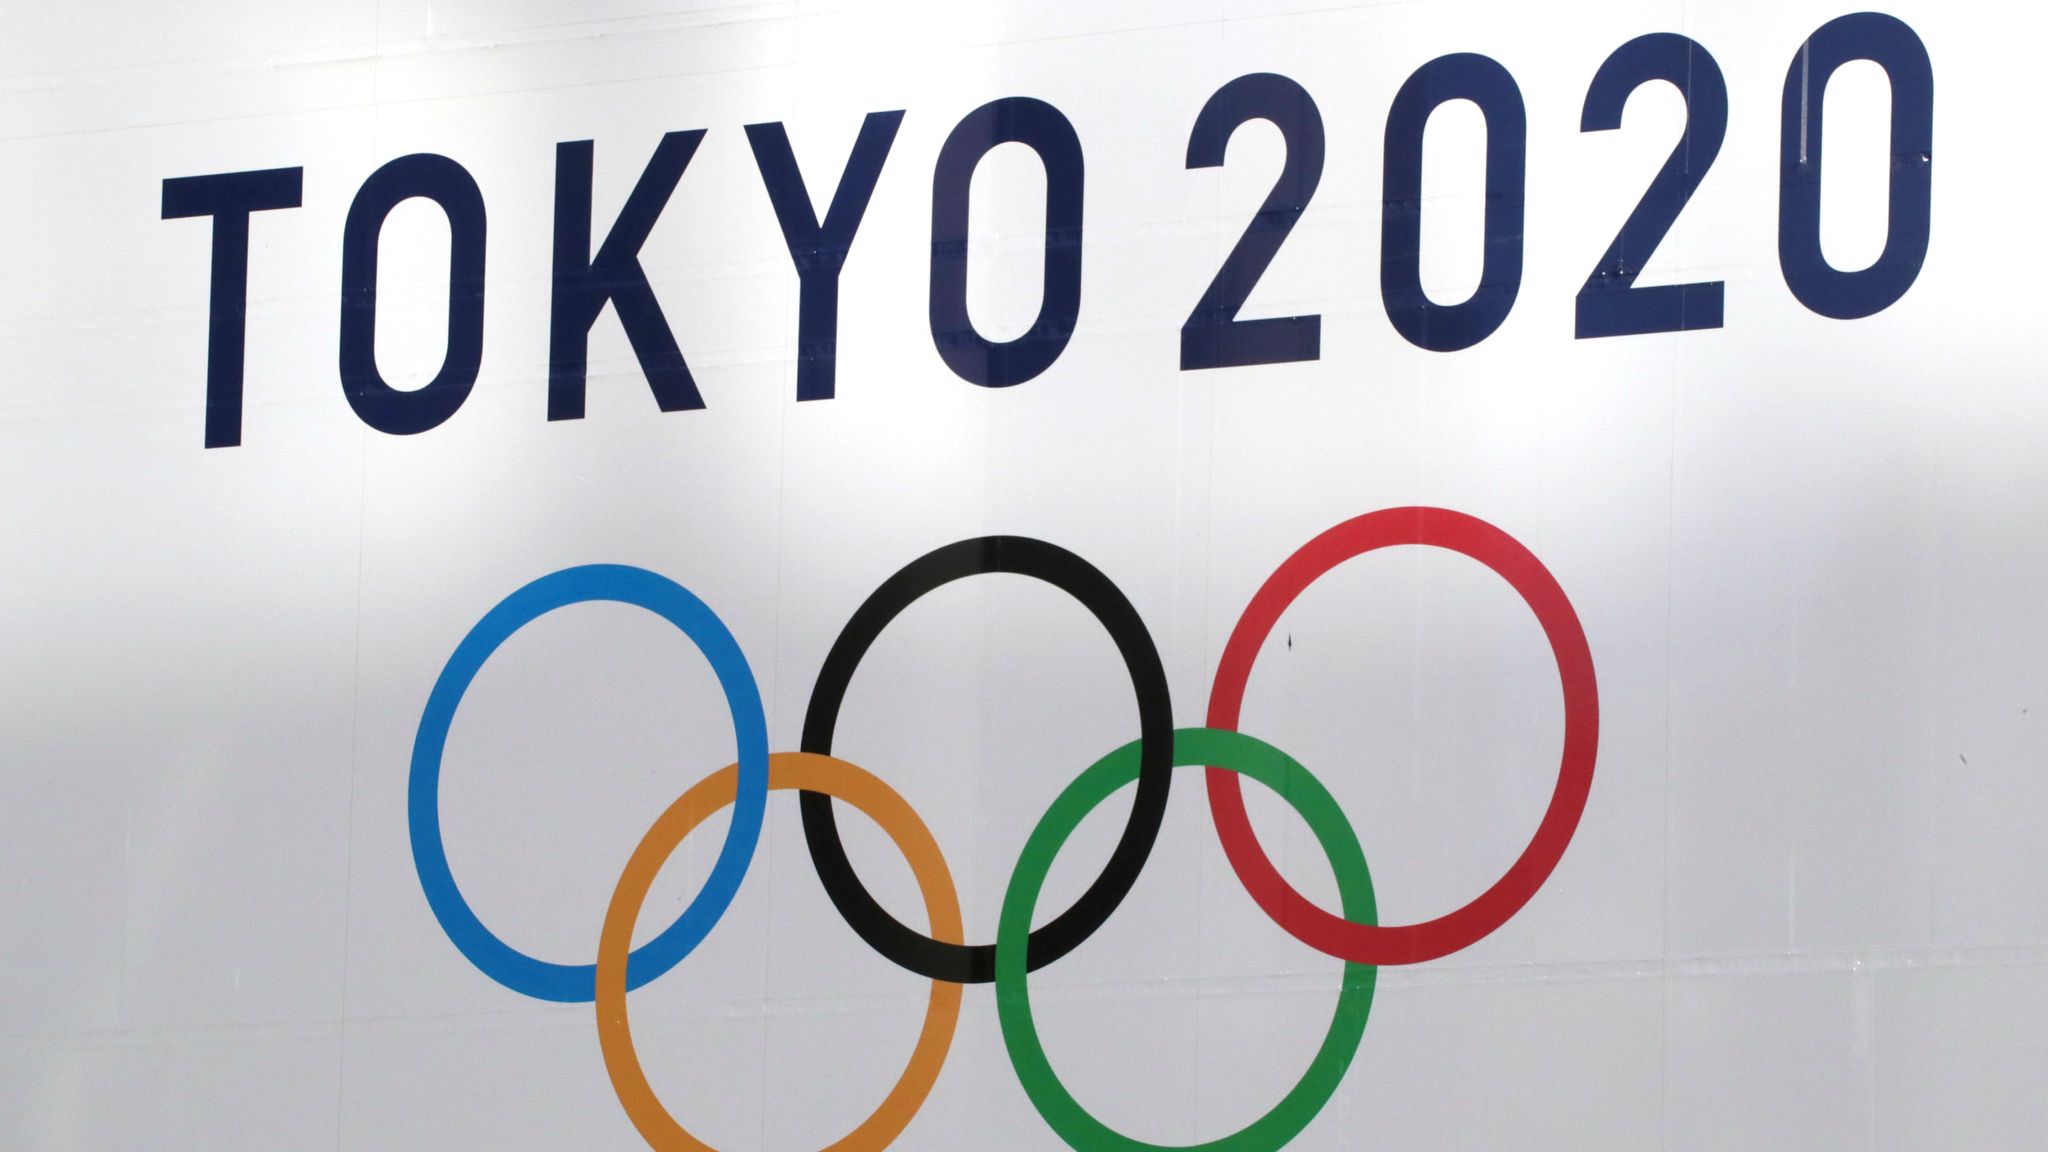 How to watch the 2020 Tokyo Olympic Games online